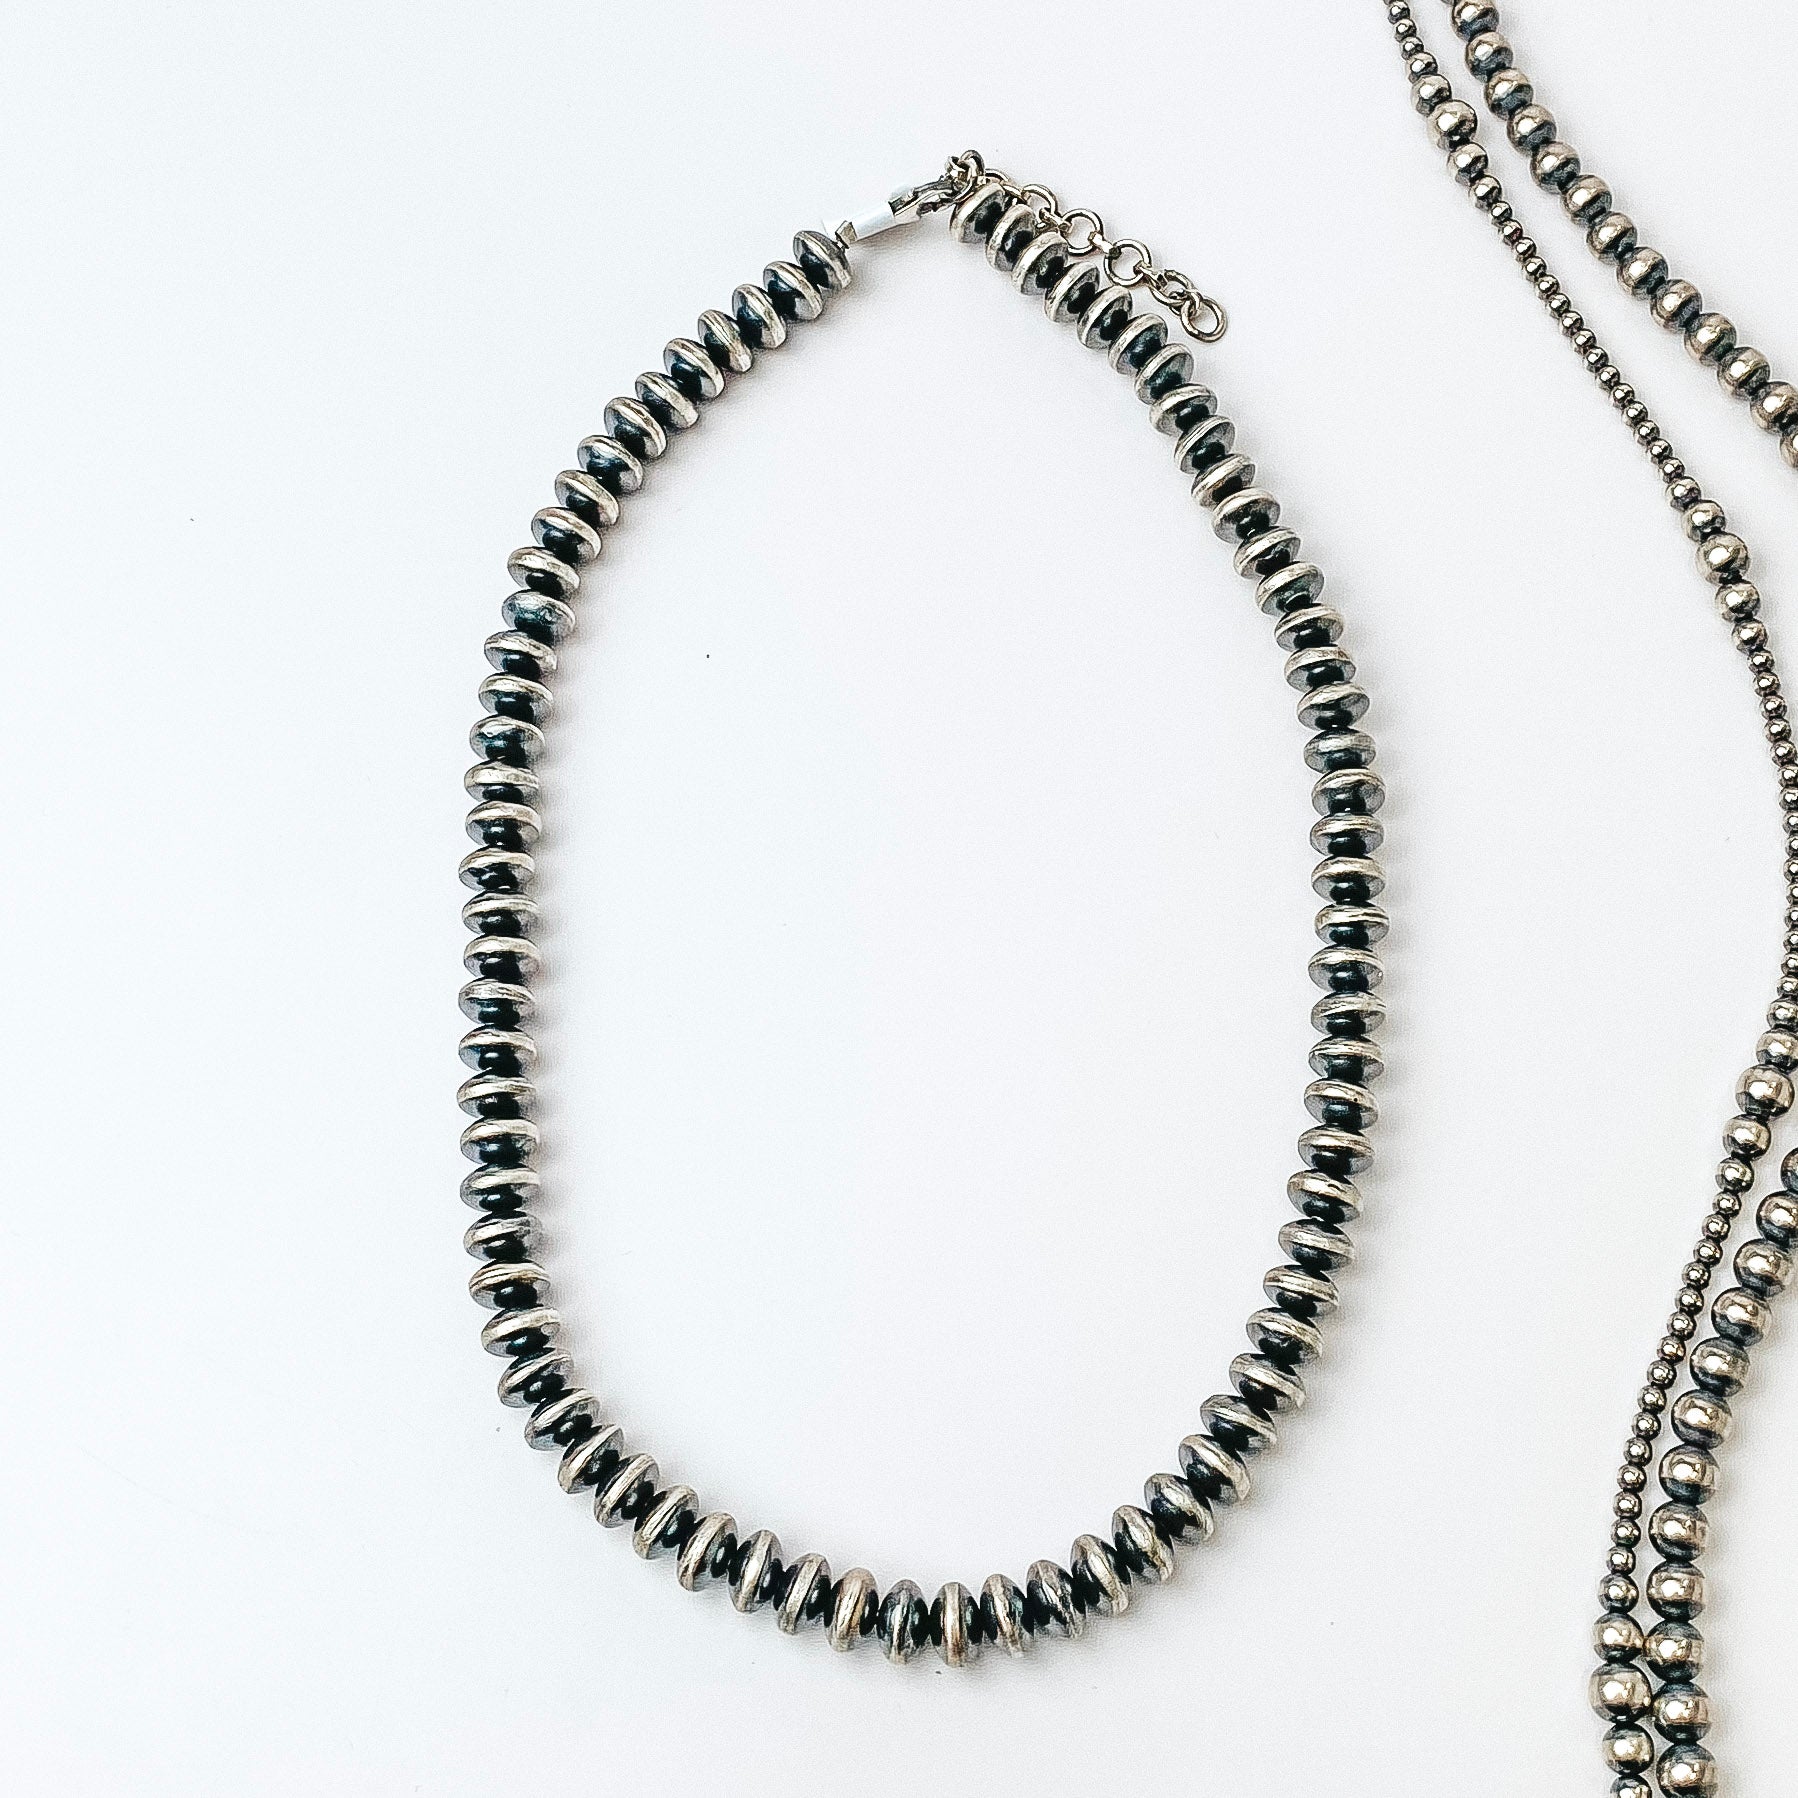 Navajo | Navajo Handmade 8mm Saucer Navajo Pearls Necklace | Varying Lengths - Giddy Up Glamour Boutique